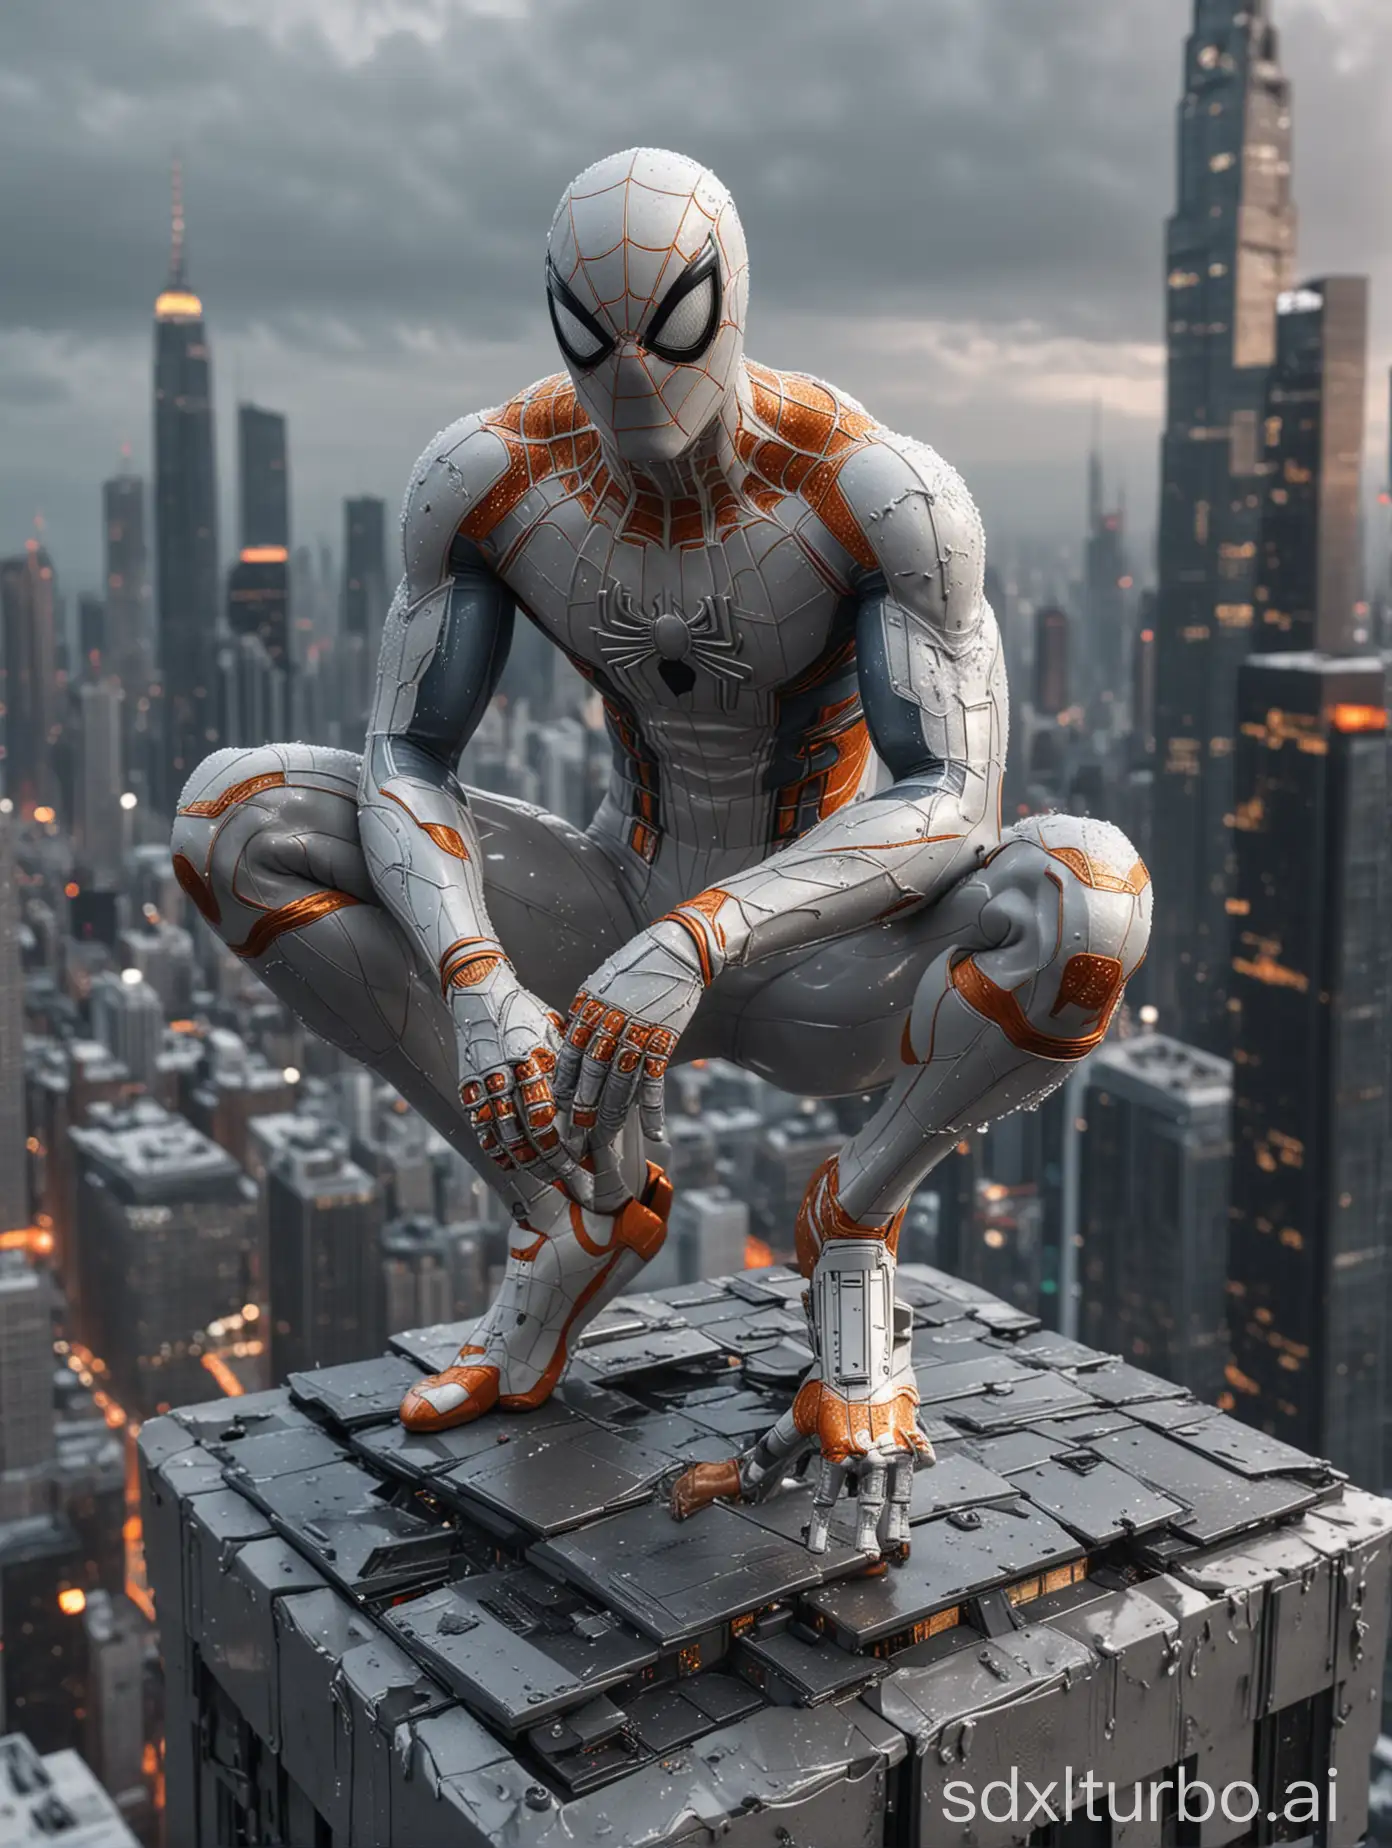 masterpiece, realistic image of Spiderman dressed in white shiny robotic porcelain, perched on top of a skyscraper, twilight atmosphere, gray sky mixed with orange, very detailed, hyper realistic, photography, 8k resolution, after the rain fall